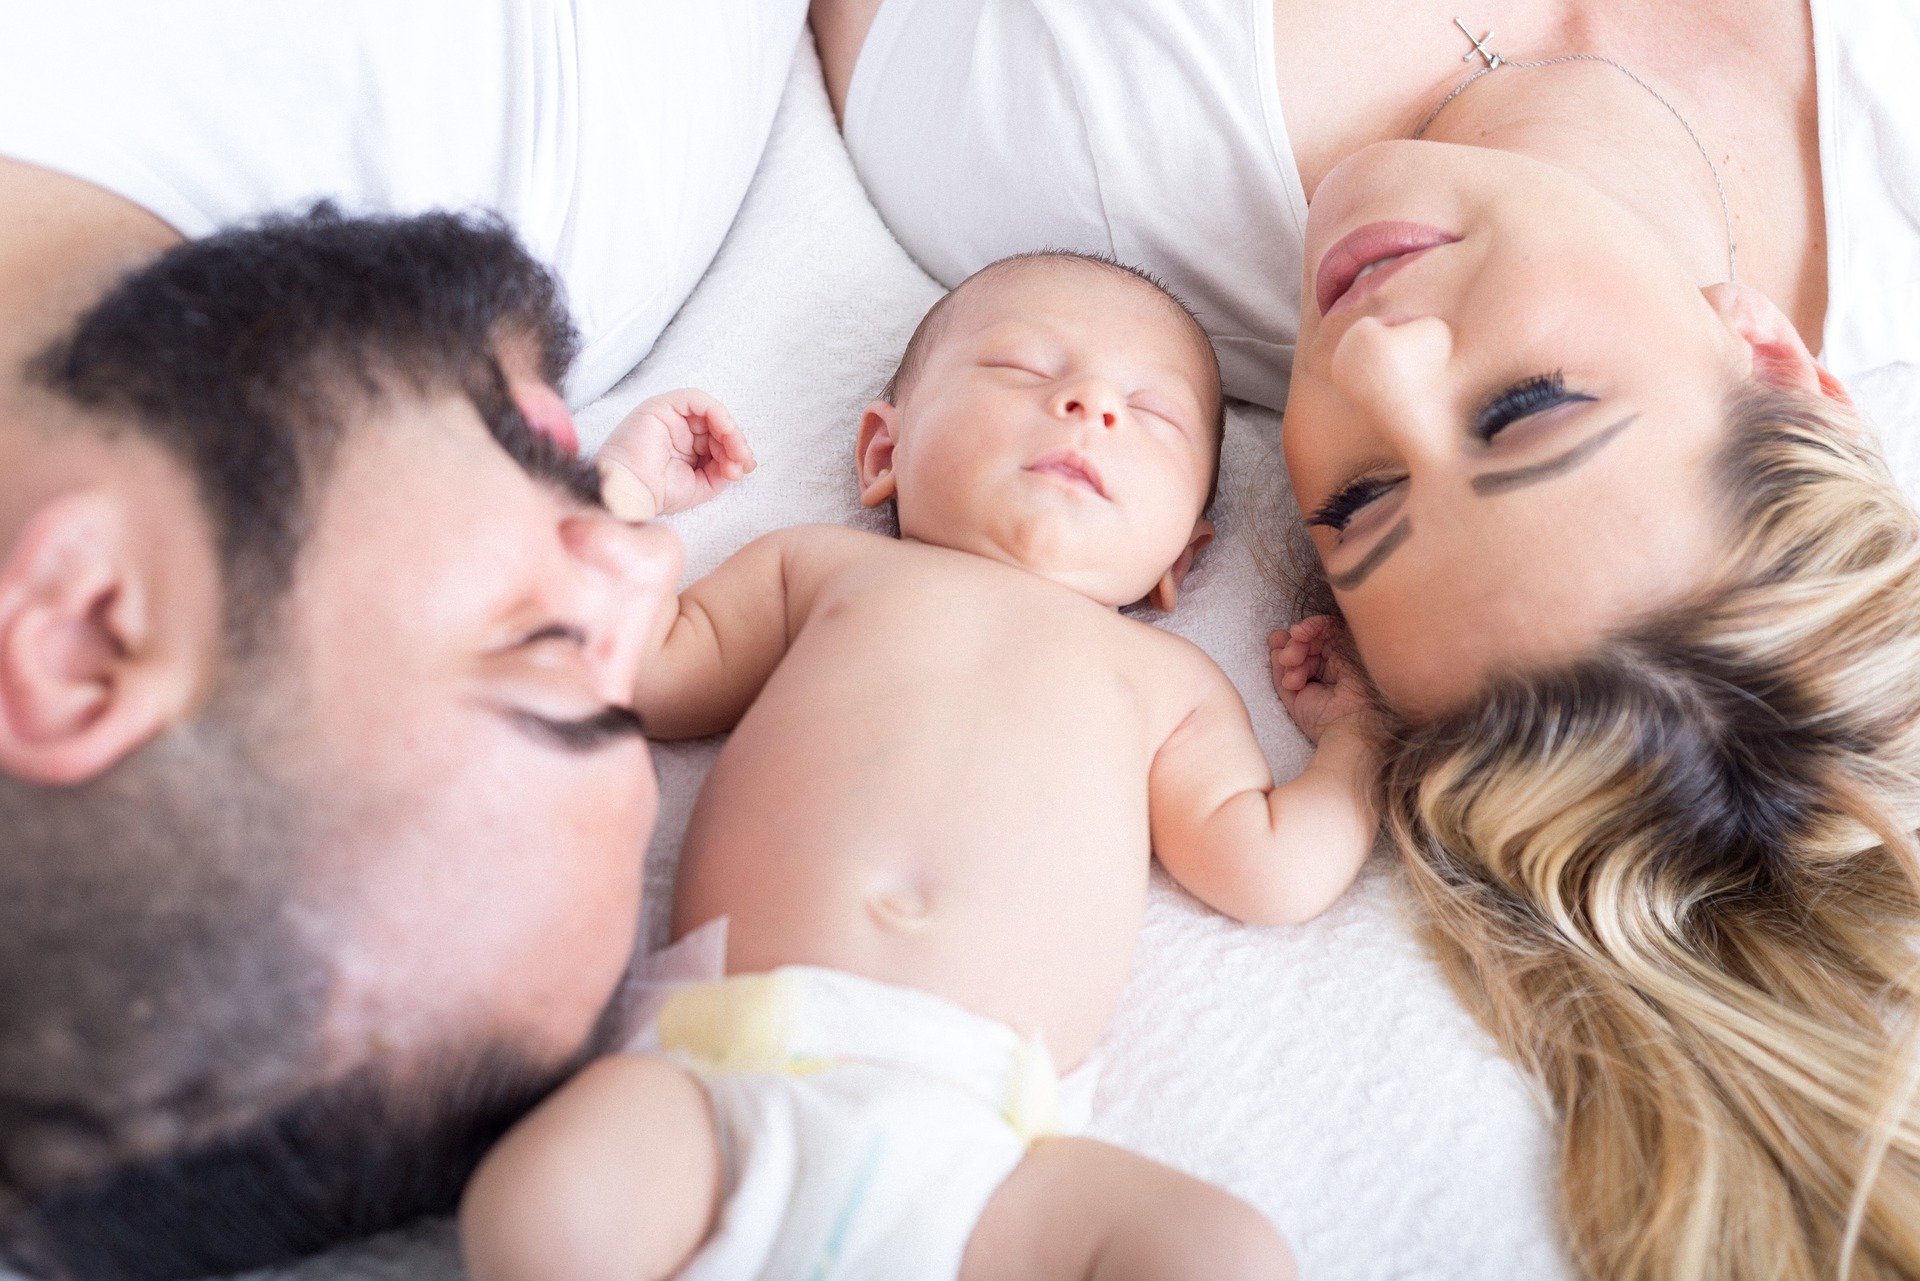 Newborn Care: All You Need To Know